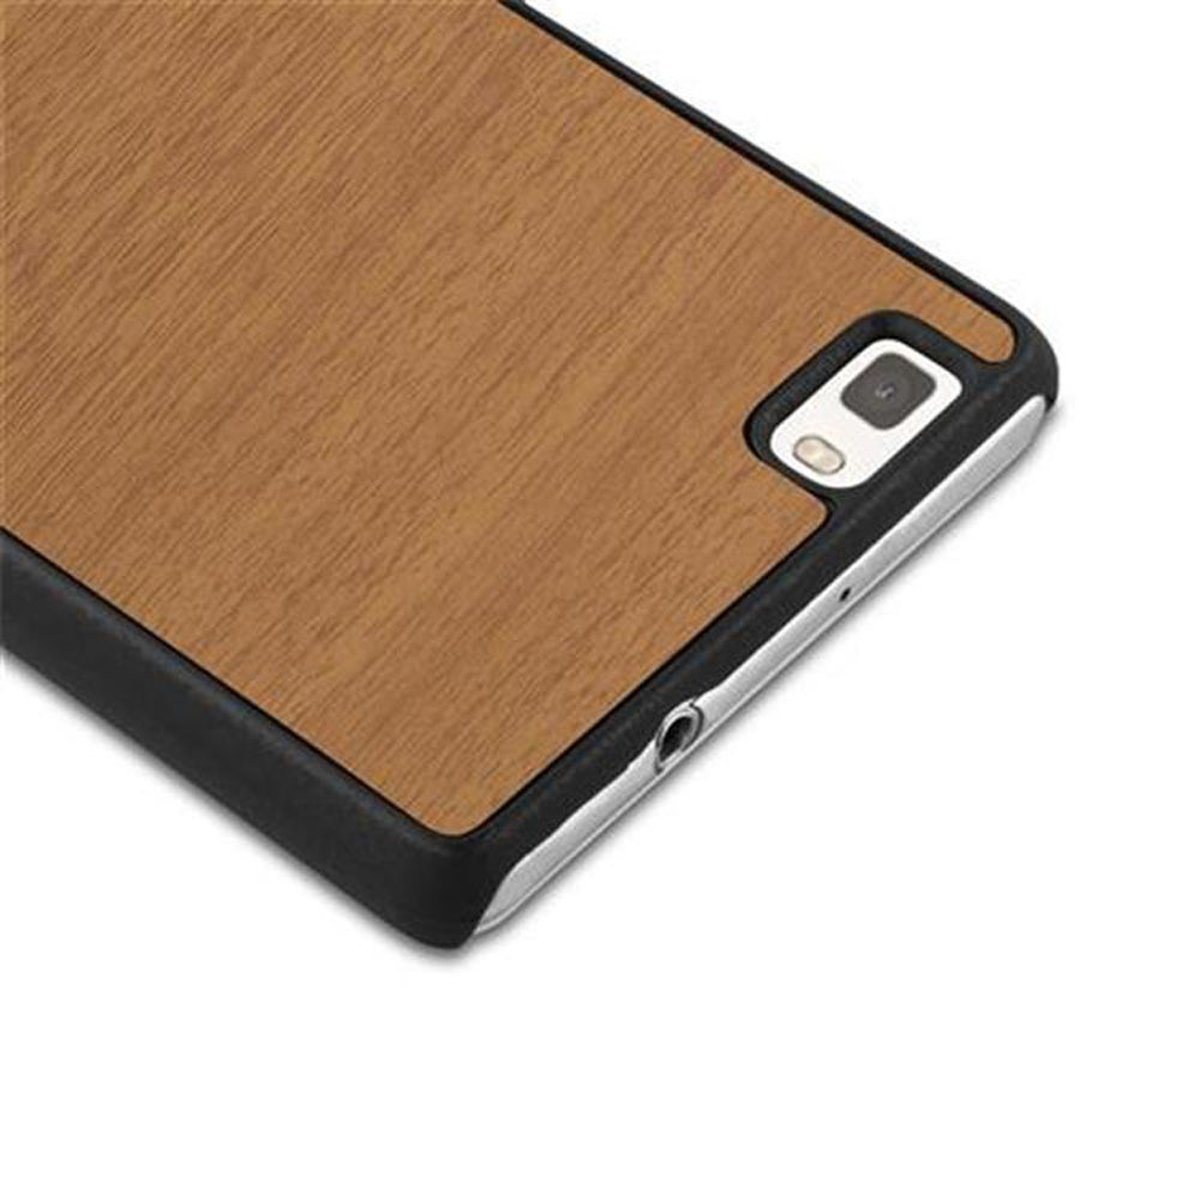 WOODY Woody Backcover, BRAUN Style, Hard LITE Hülle Case Huawei, P8 2015, CADORABO